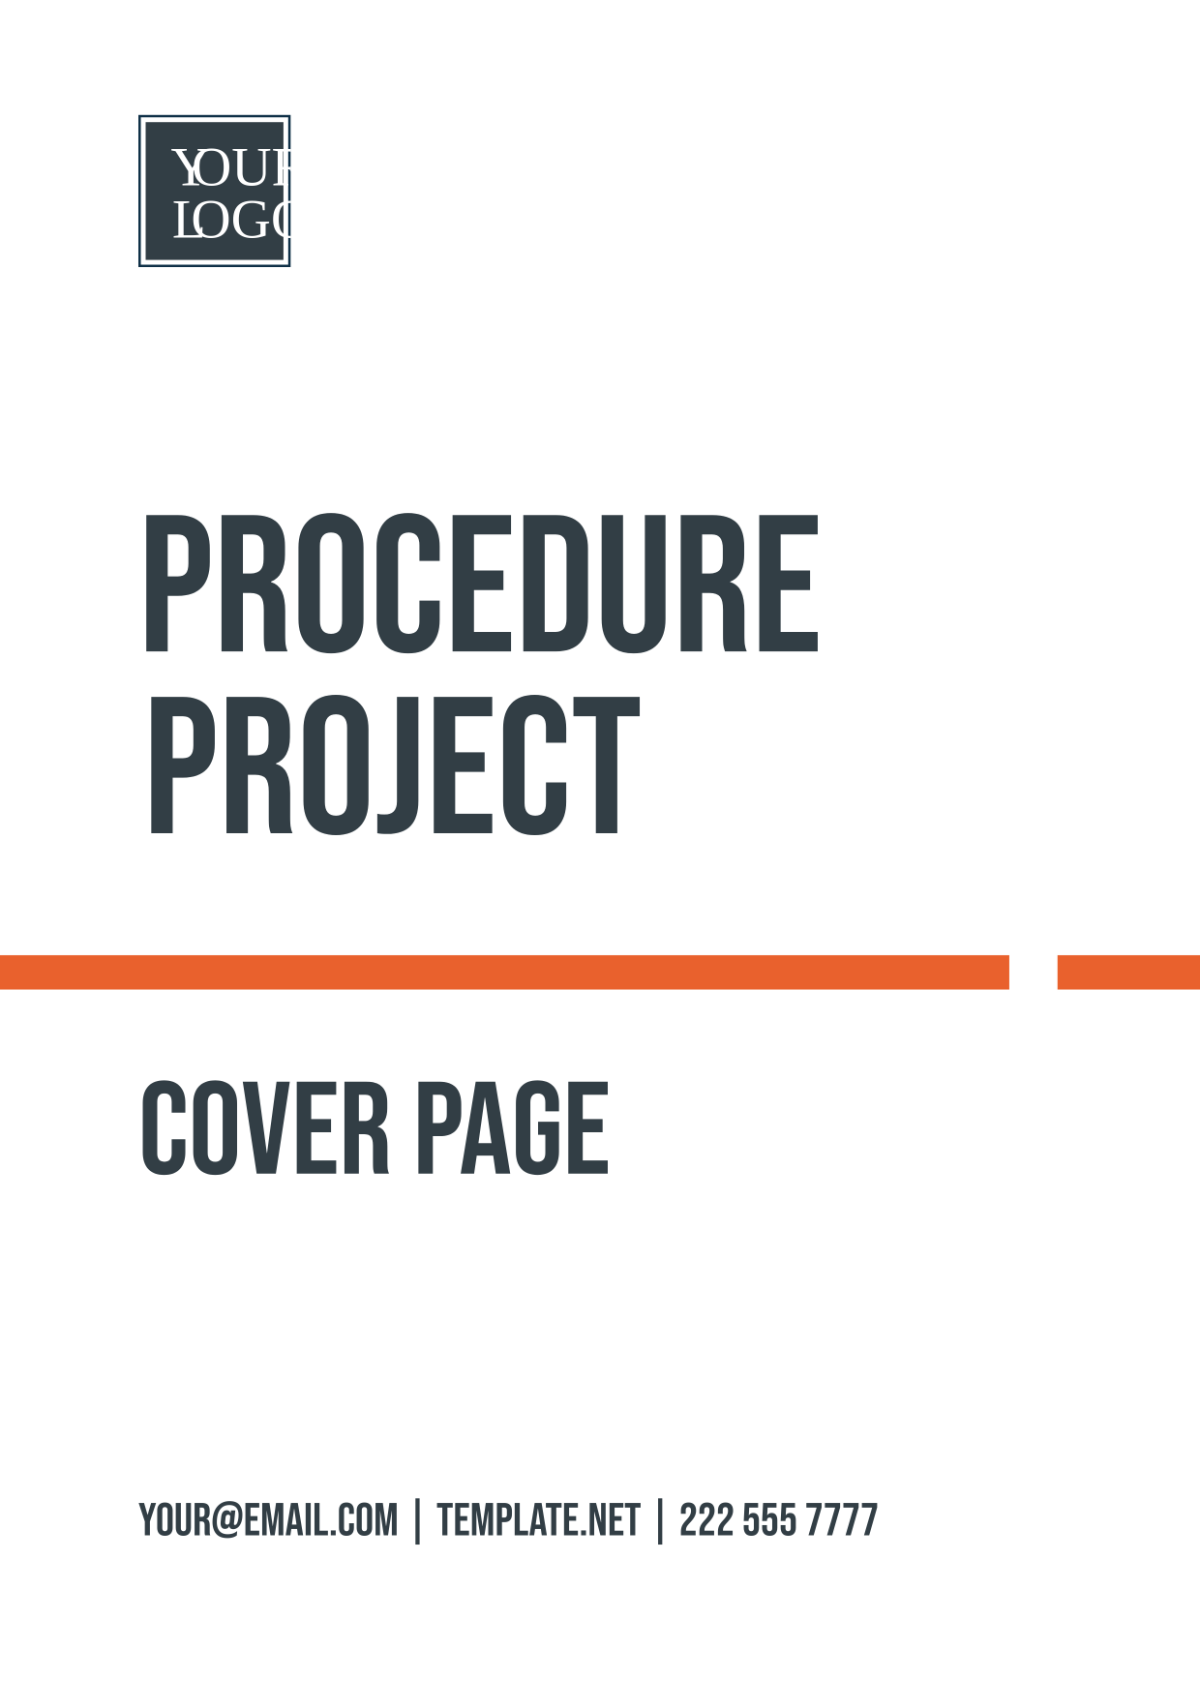 Free Procedure Project Cover Page Template